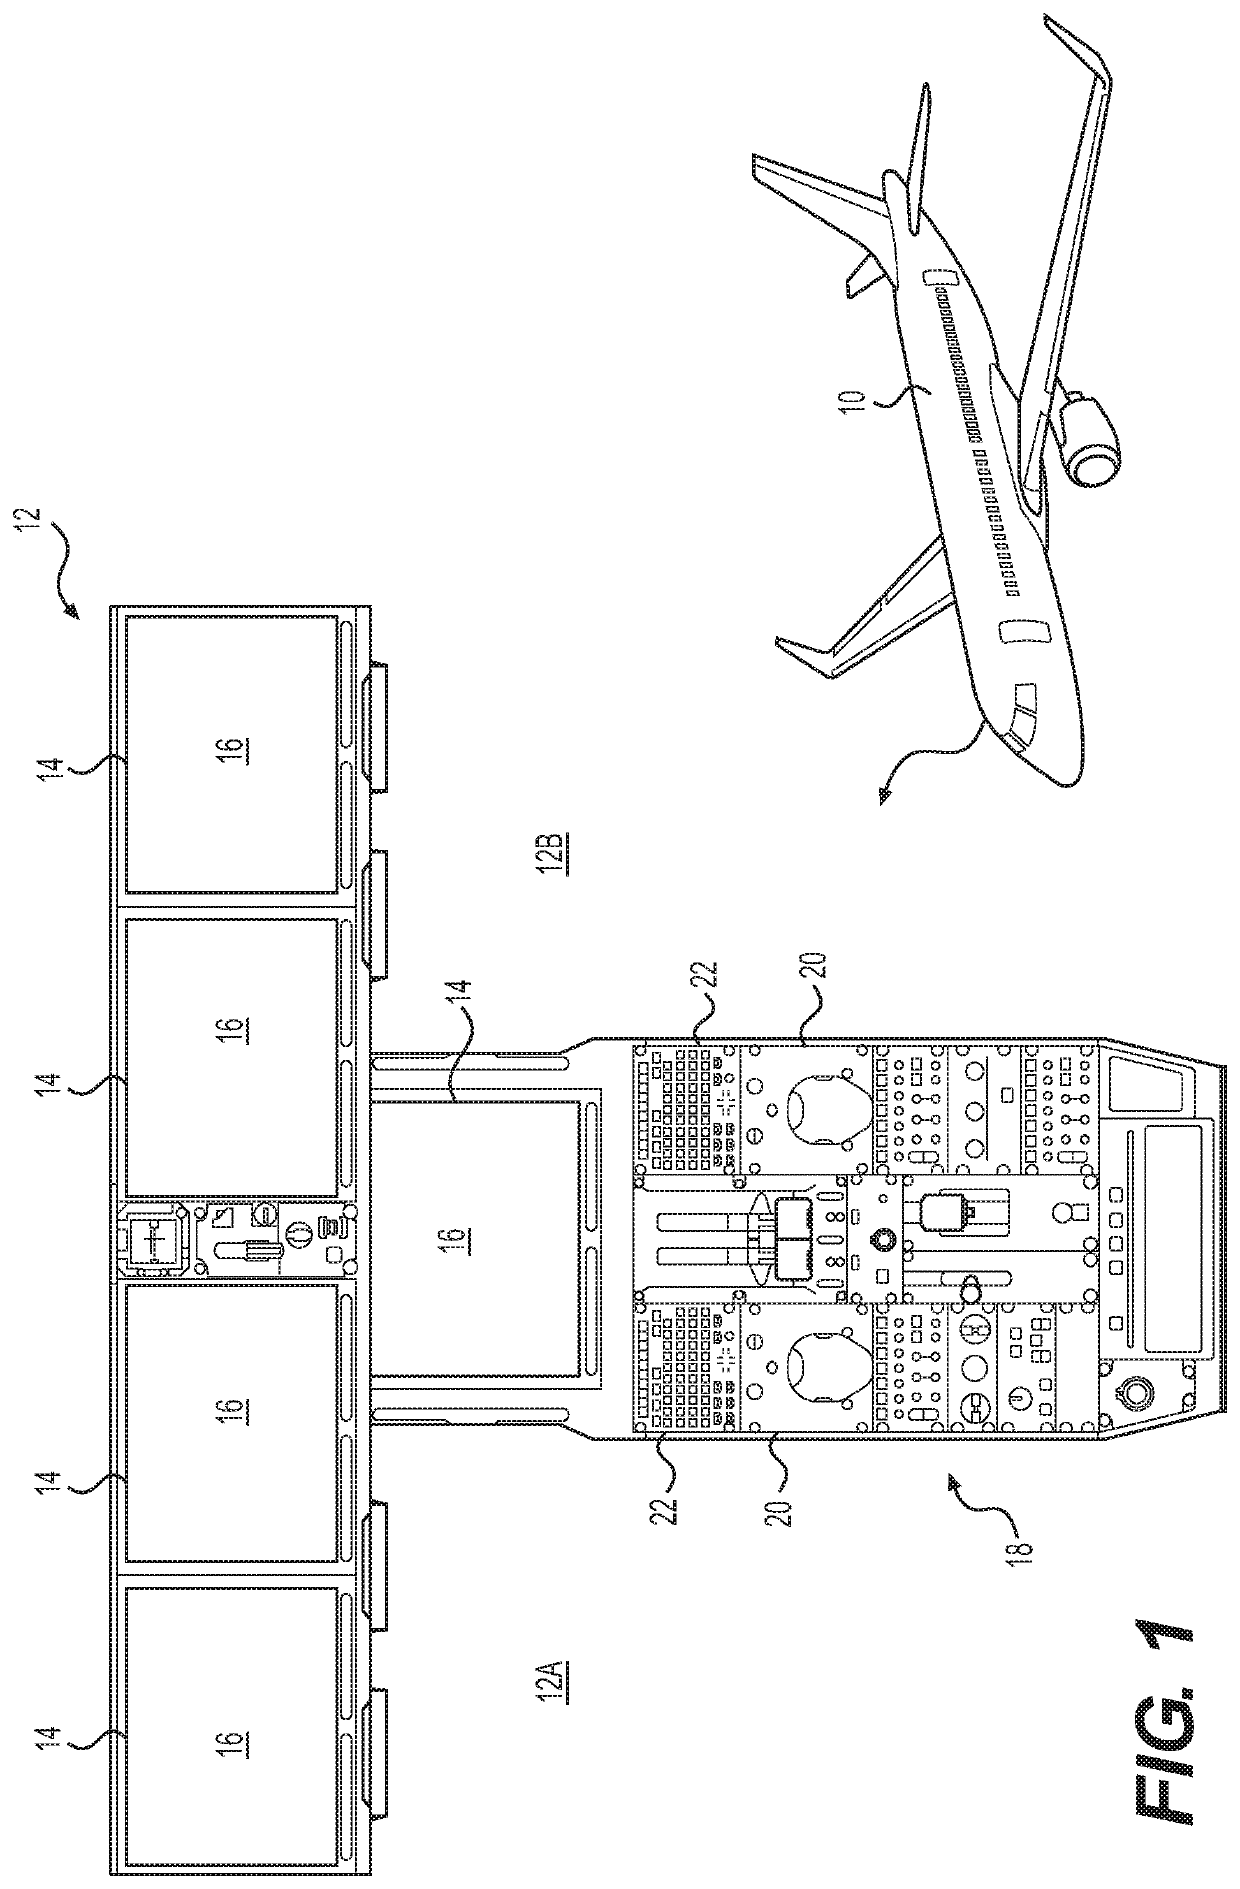 Cursor control for aircraft display device